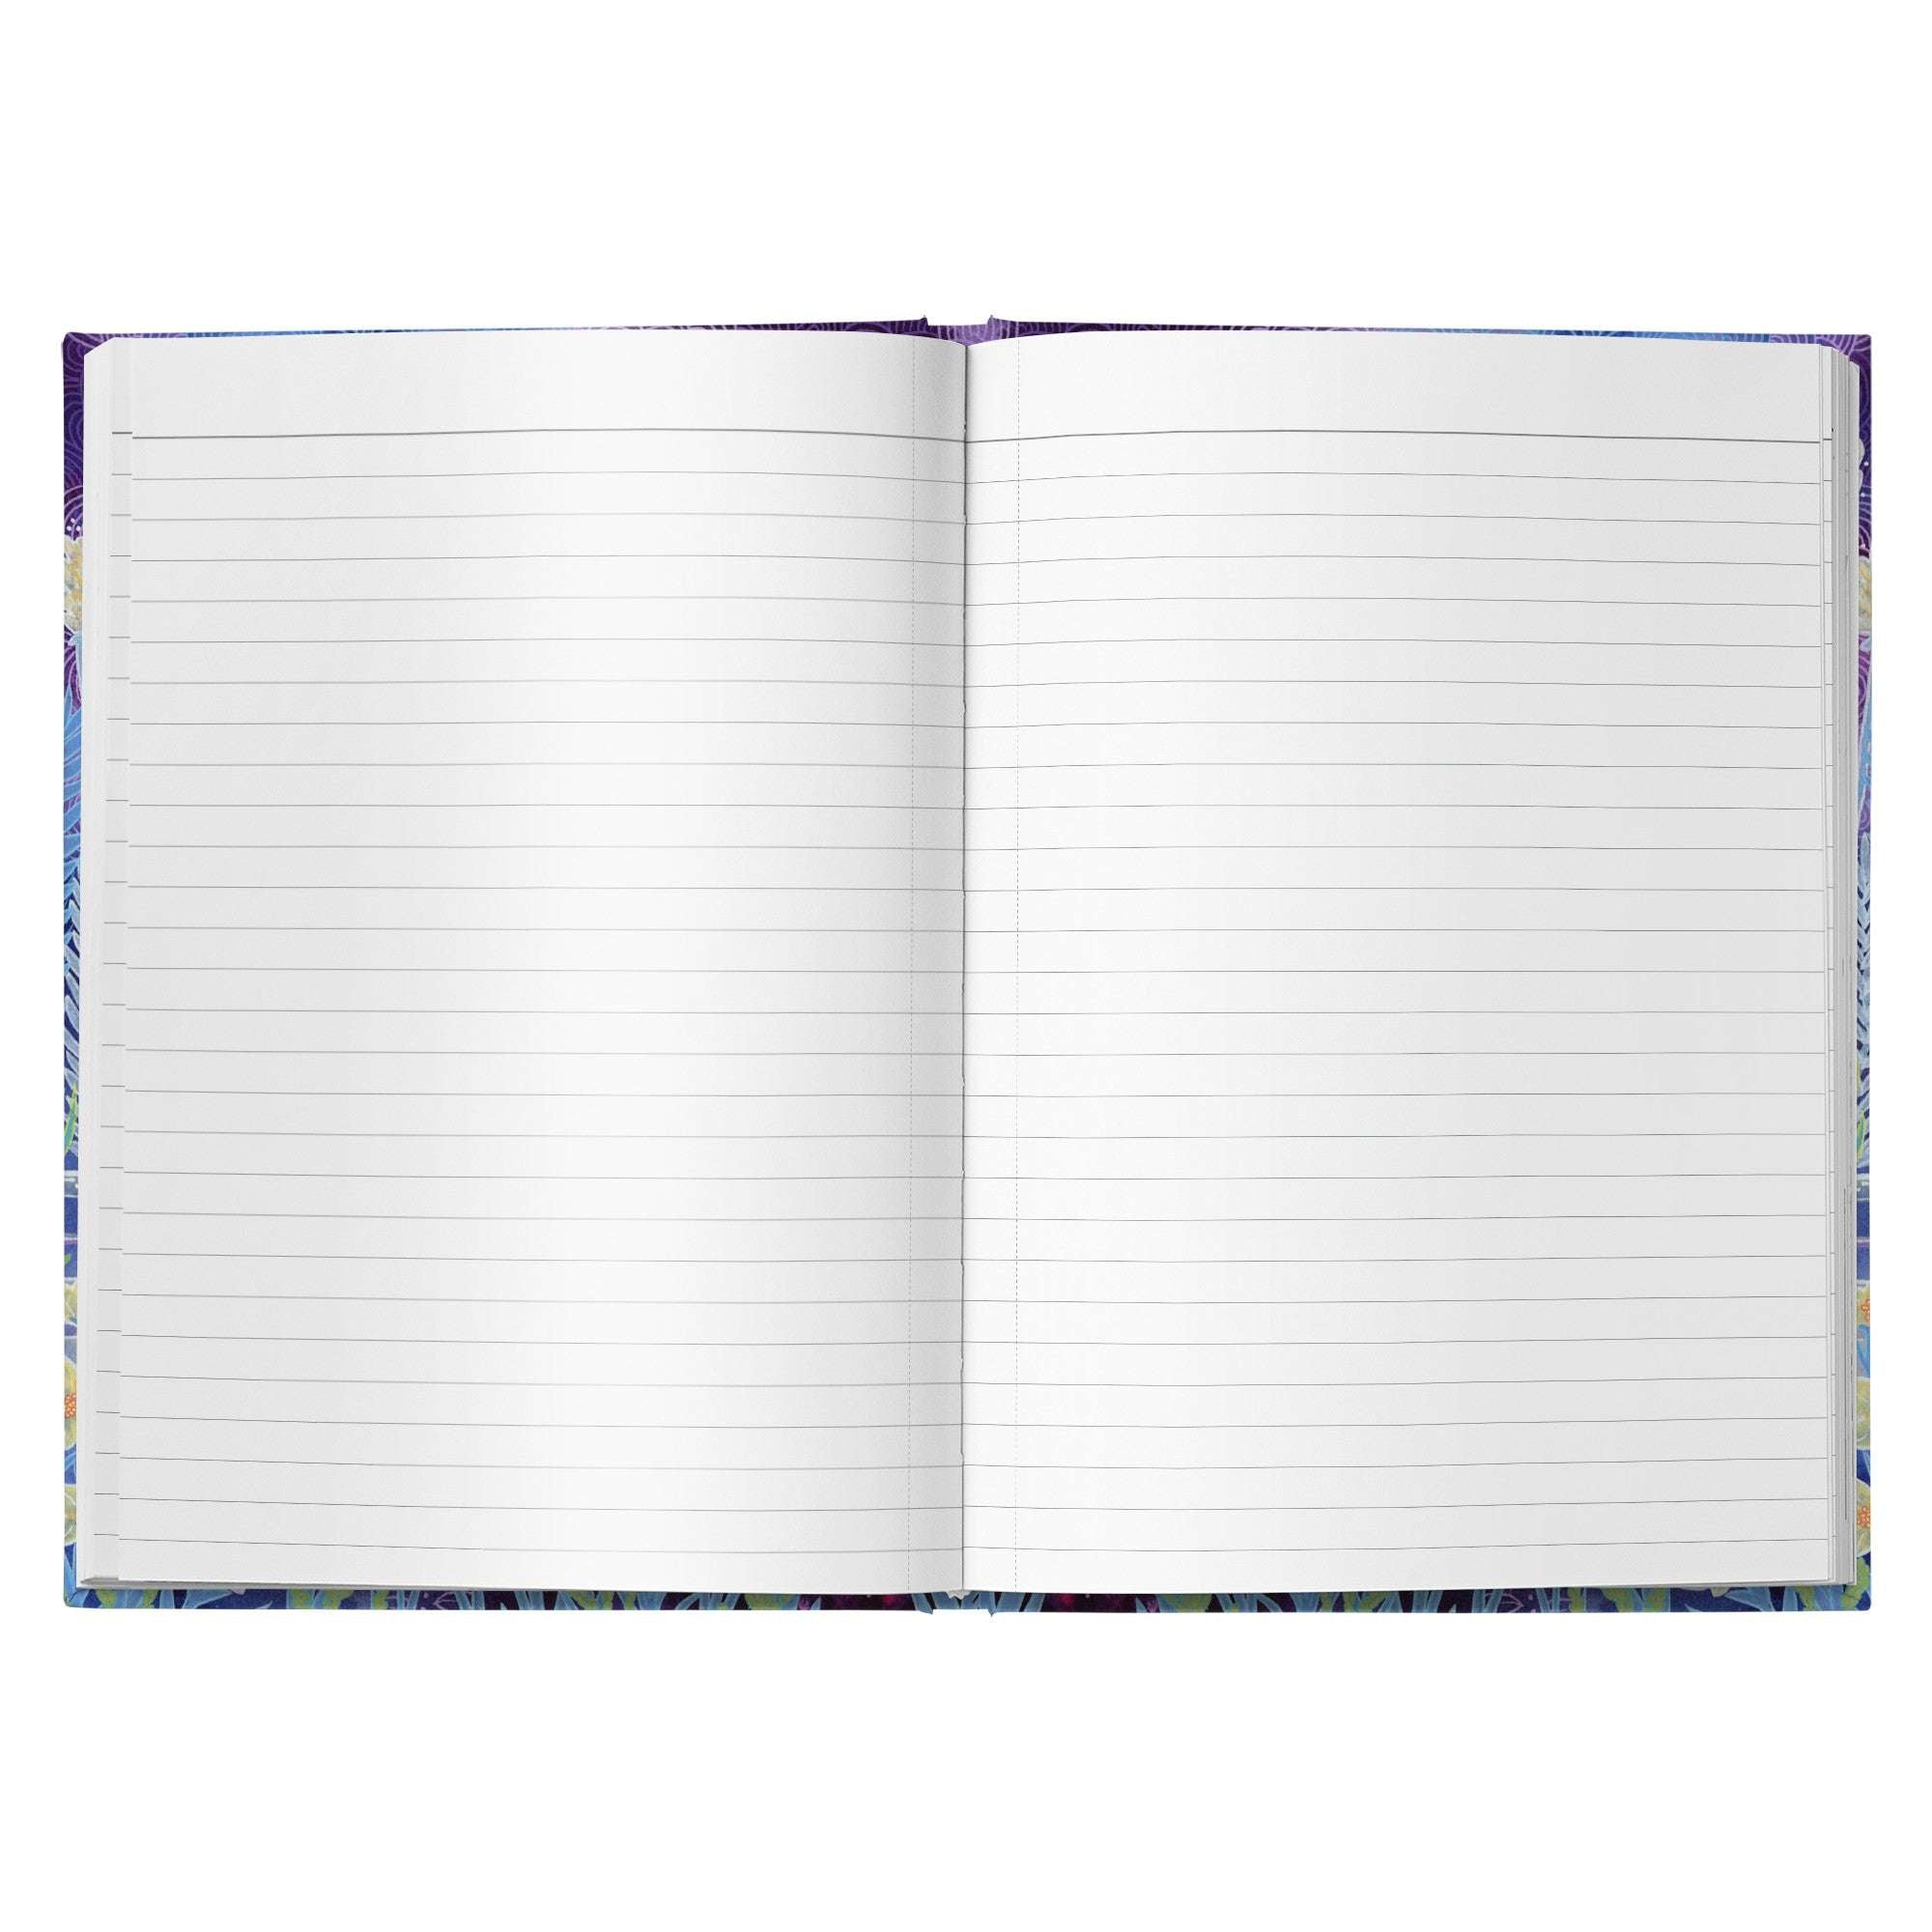 An open Ferret Journal with blank lined pages, showing a colorful cover edge.